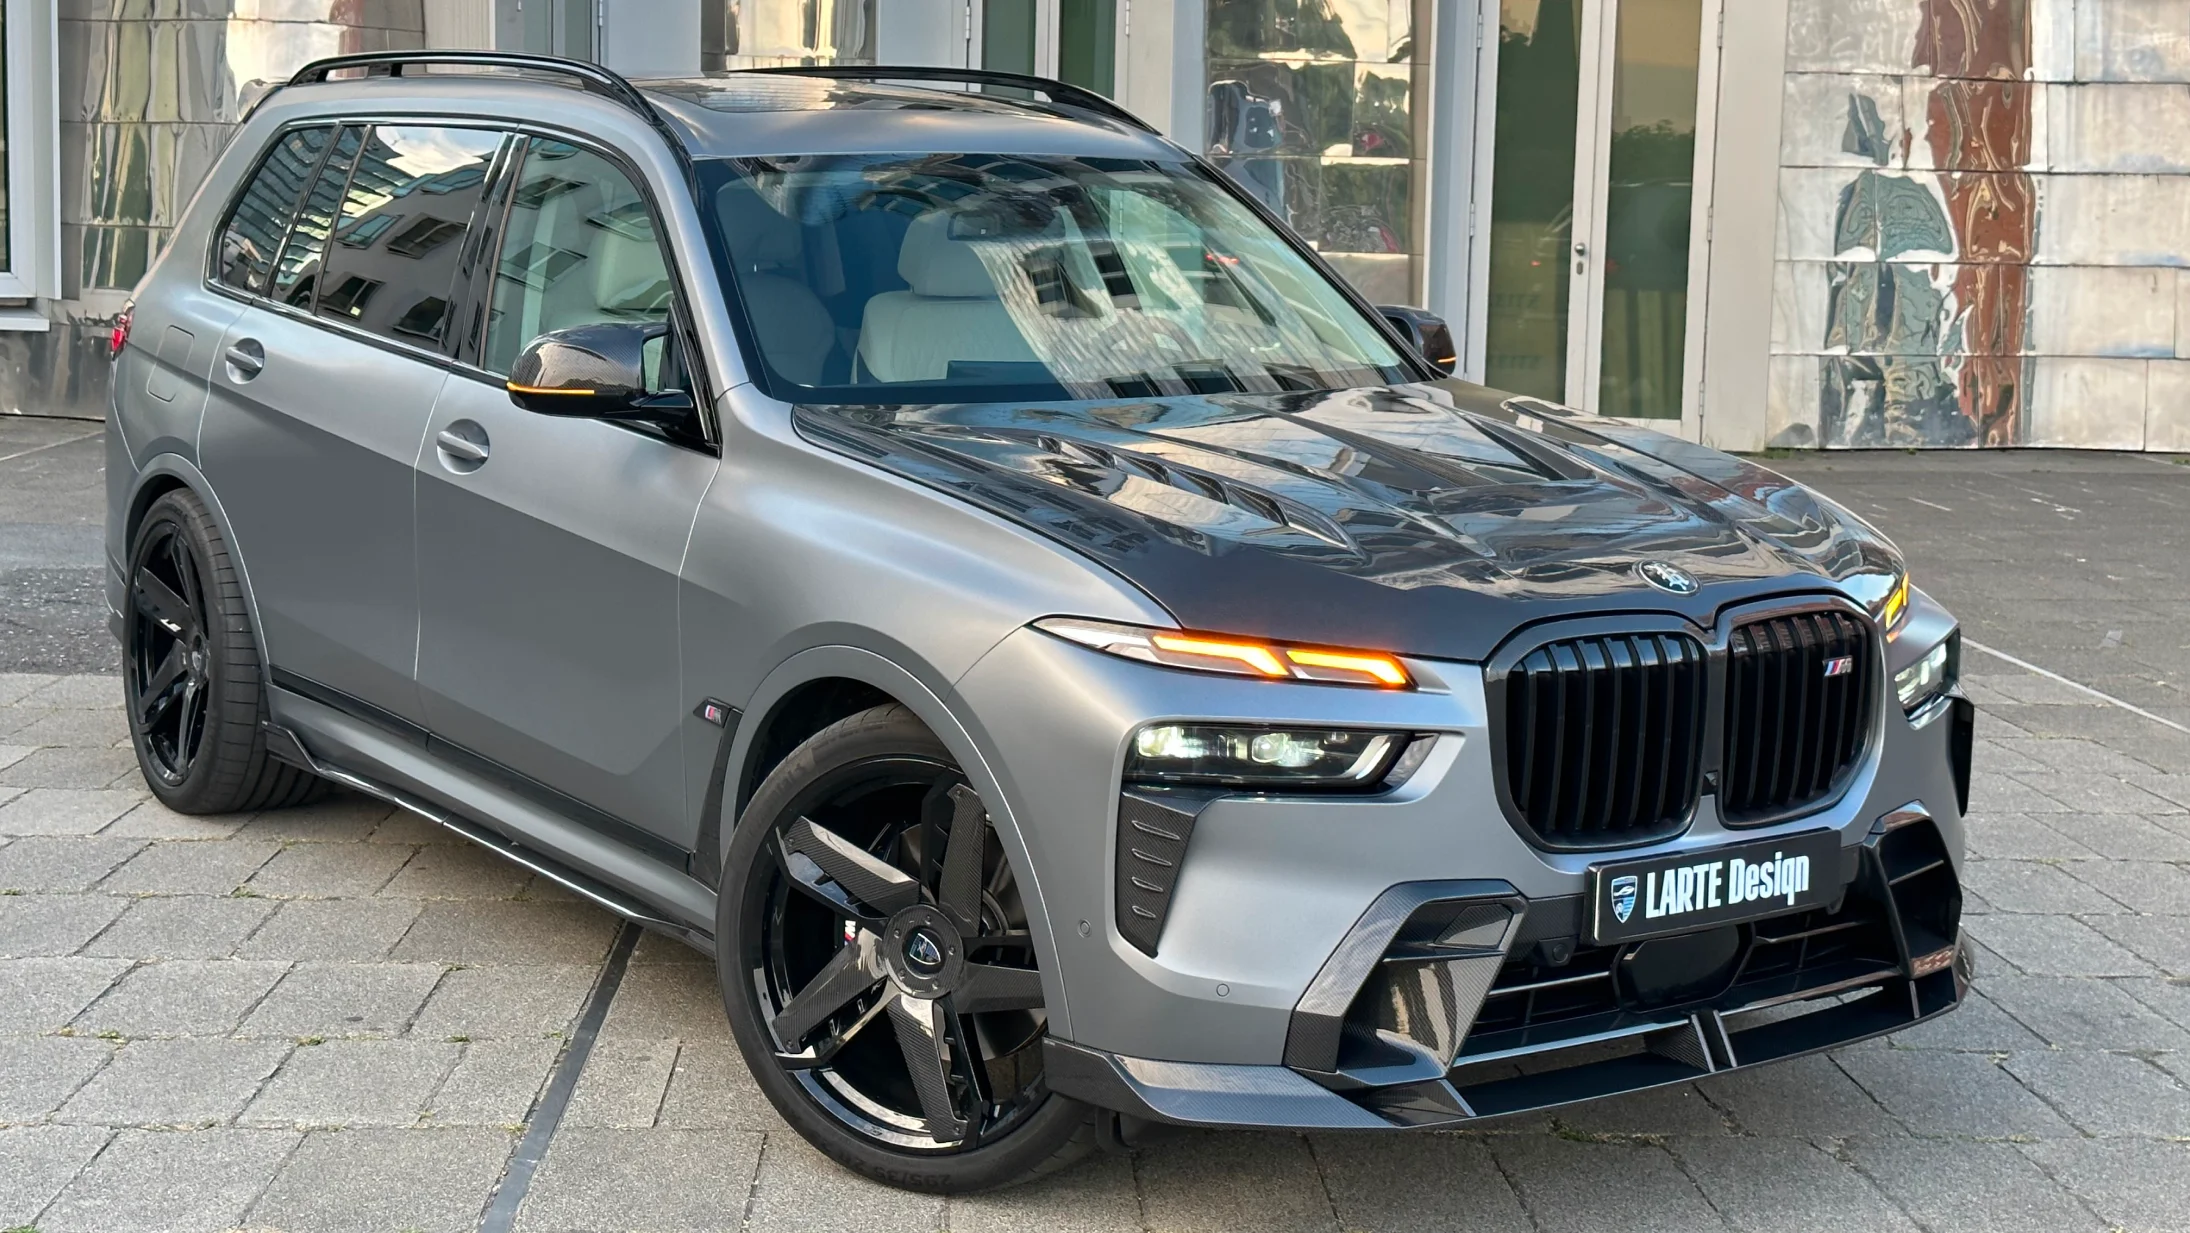 Front angle view on a BMW X7 with a body kit giving the car a custom appearance